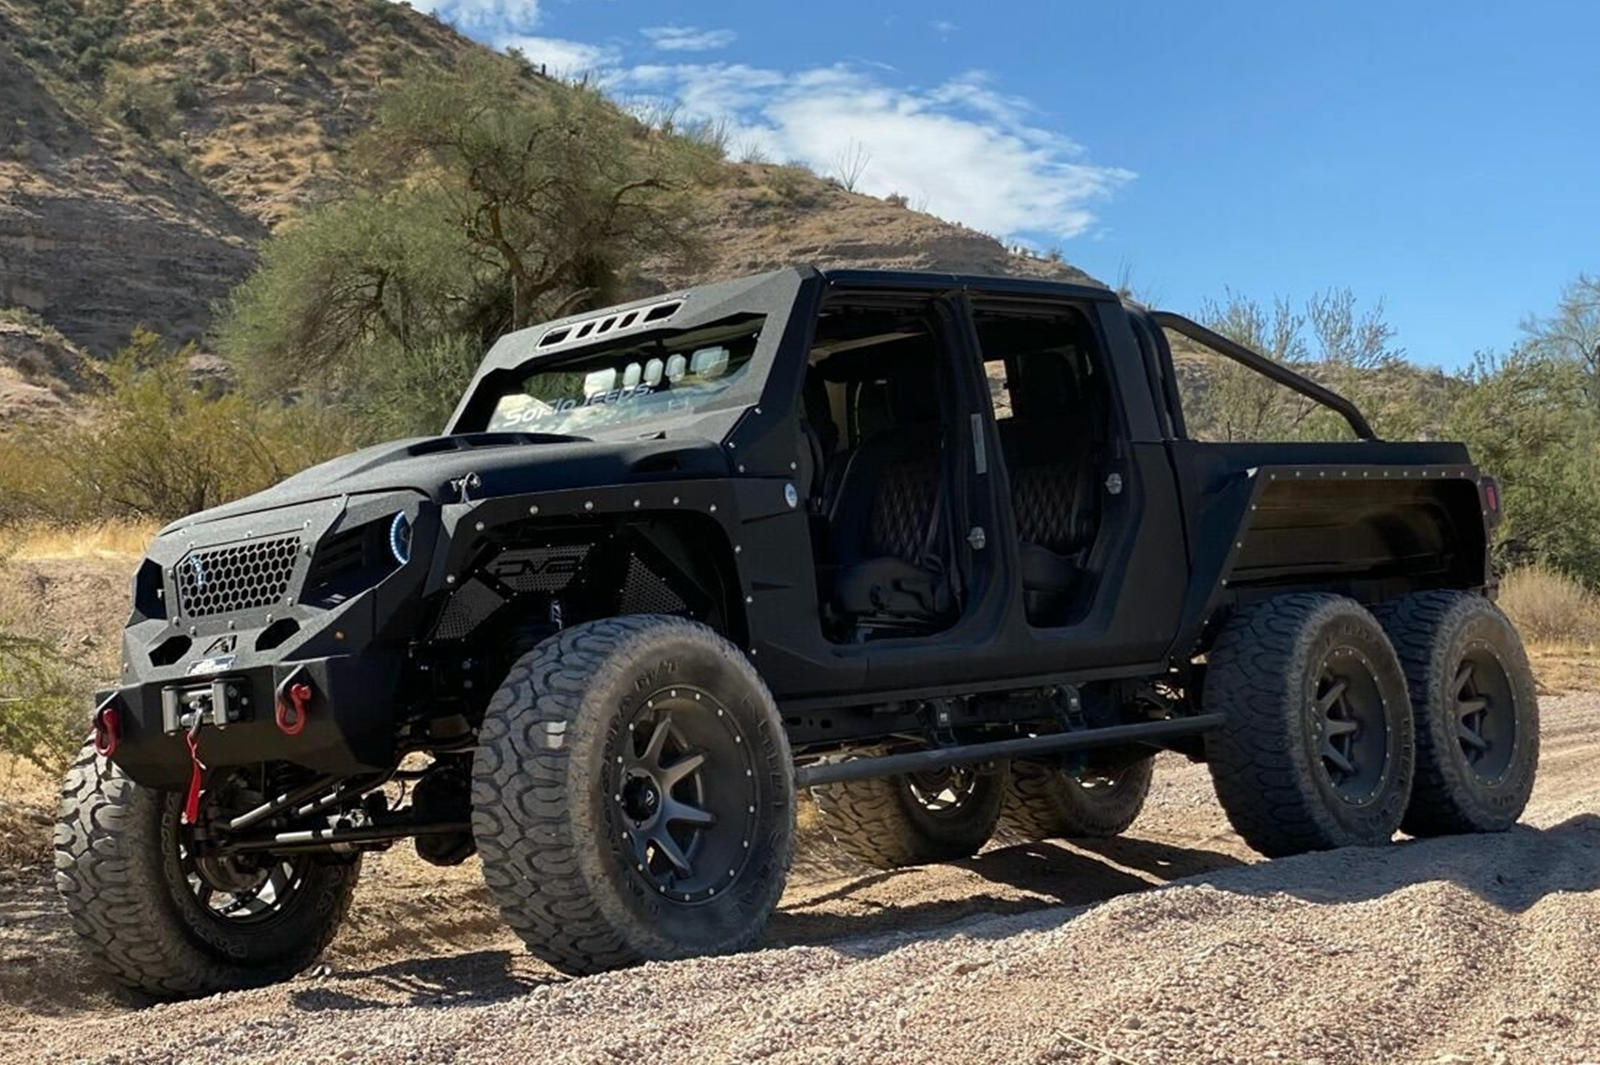 lamtac encounter muscle monster soflo jeeps builds a x wheels with hp engine block costing more than thousand dollars 64d5dfae5997d Encounter "muscle Monster" Soflo Jeeps Builds A 6x6 6 Wheels With 700 Hp Engine Block Costing More Than 400 Thousand Dollars